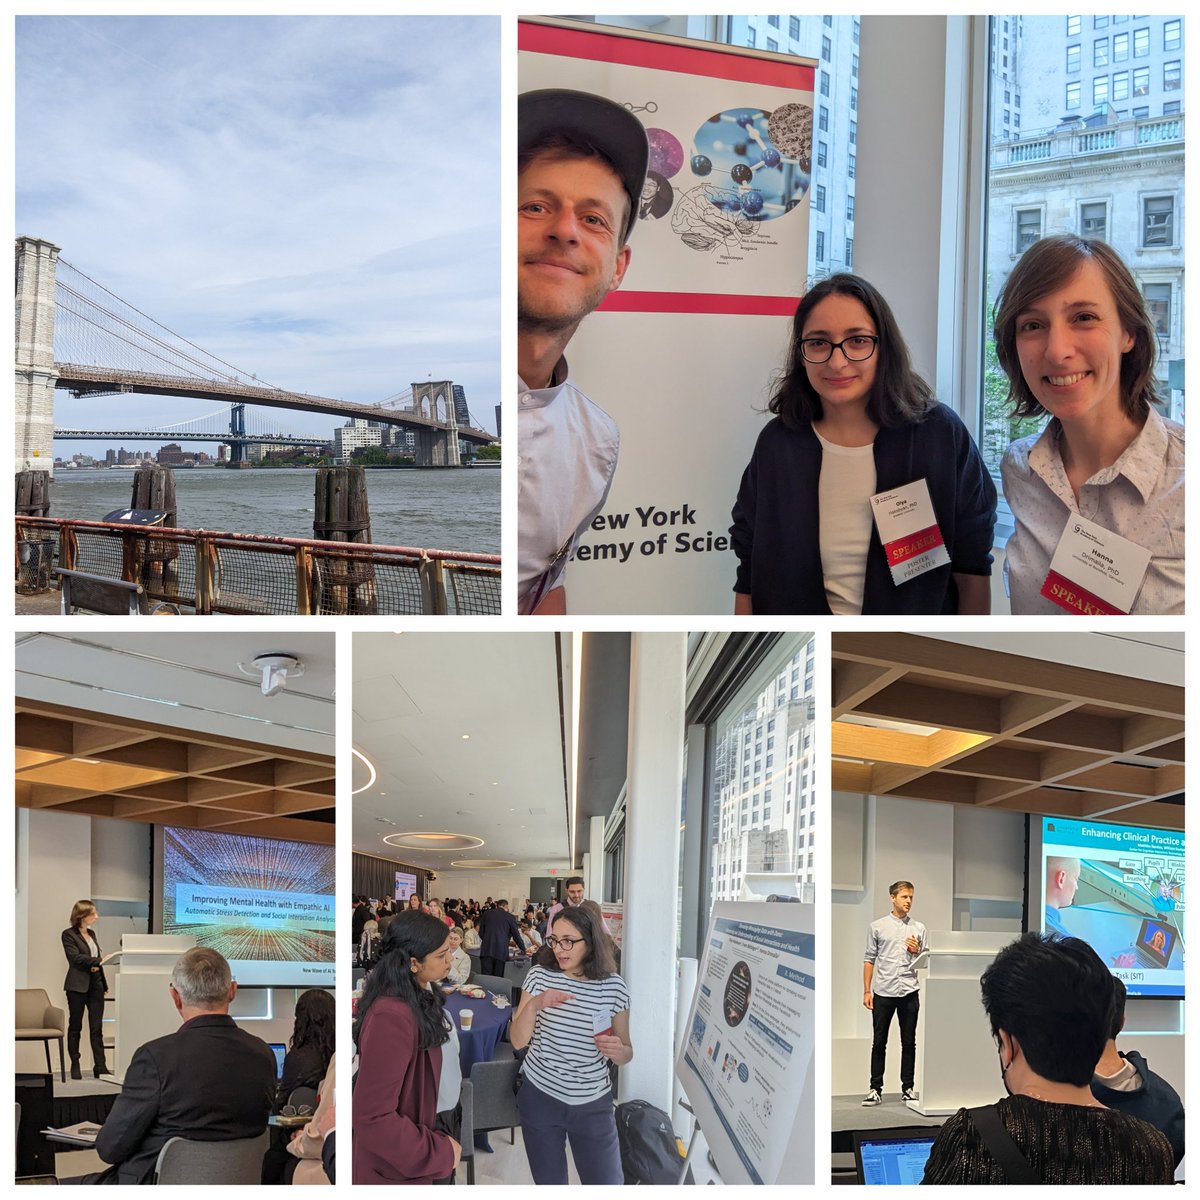 Happy to present work on social interaction analysis using the Simulated Interaction Task at the 'New Wave of AI in Healthcare' symposium in #NYC and joining @HDrimalla to visit our collaboration partners @AIHealthMtSinai.
#NewWaveAIHealth, #BigApple